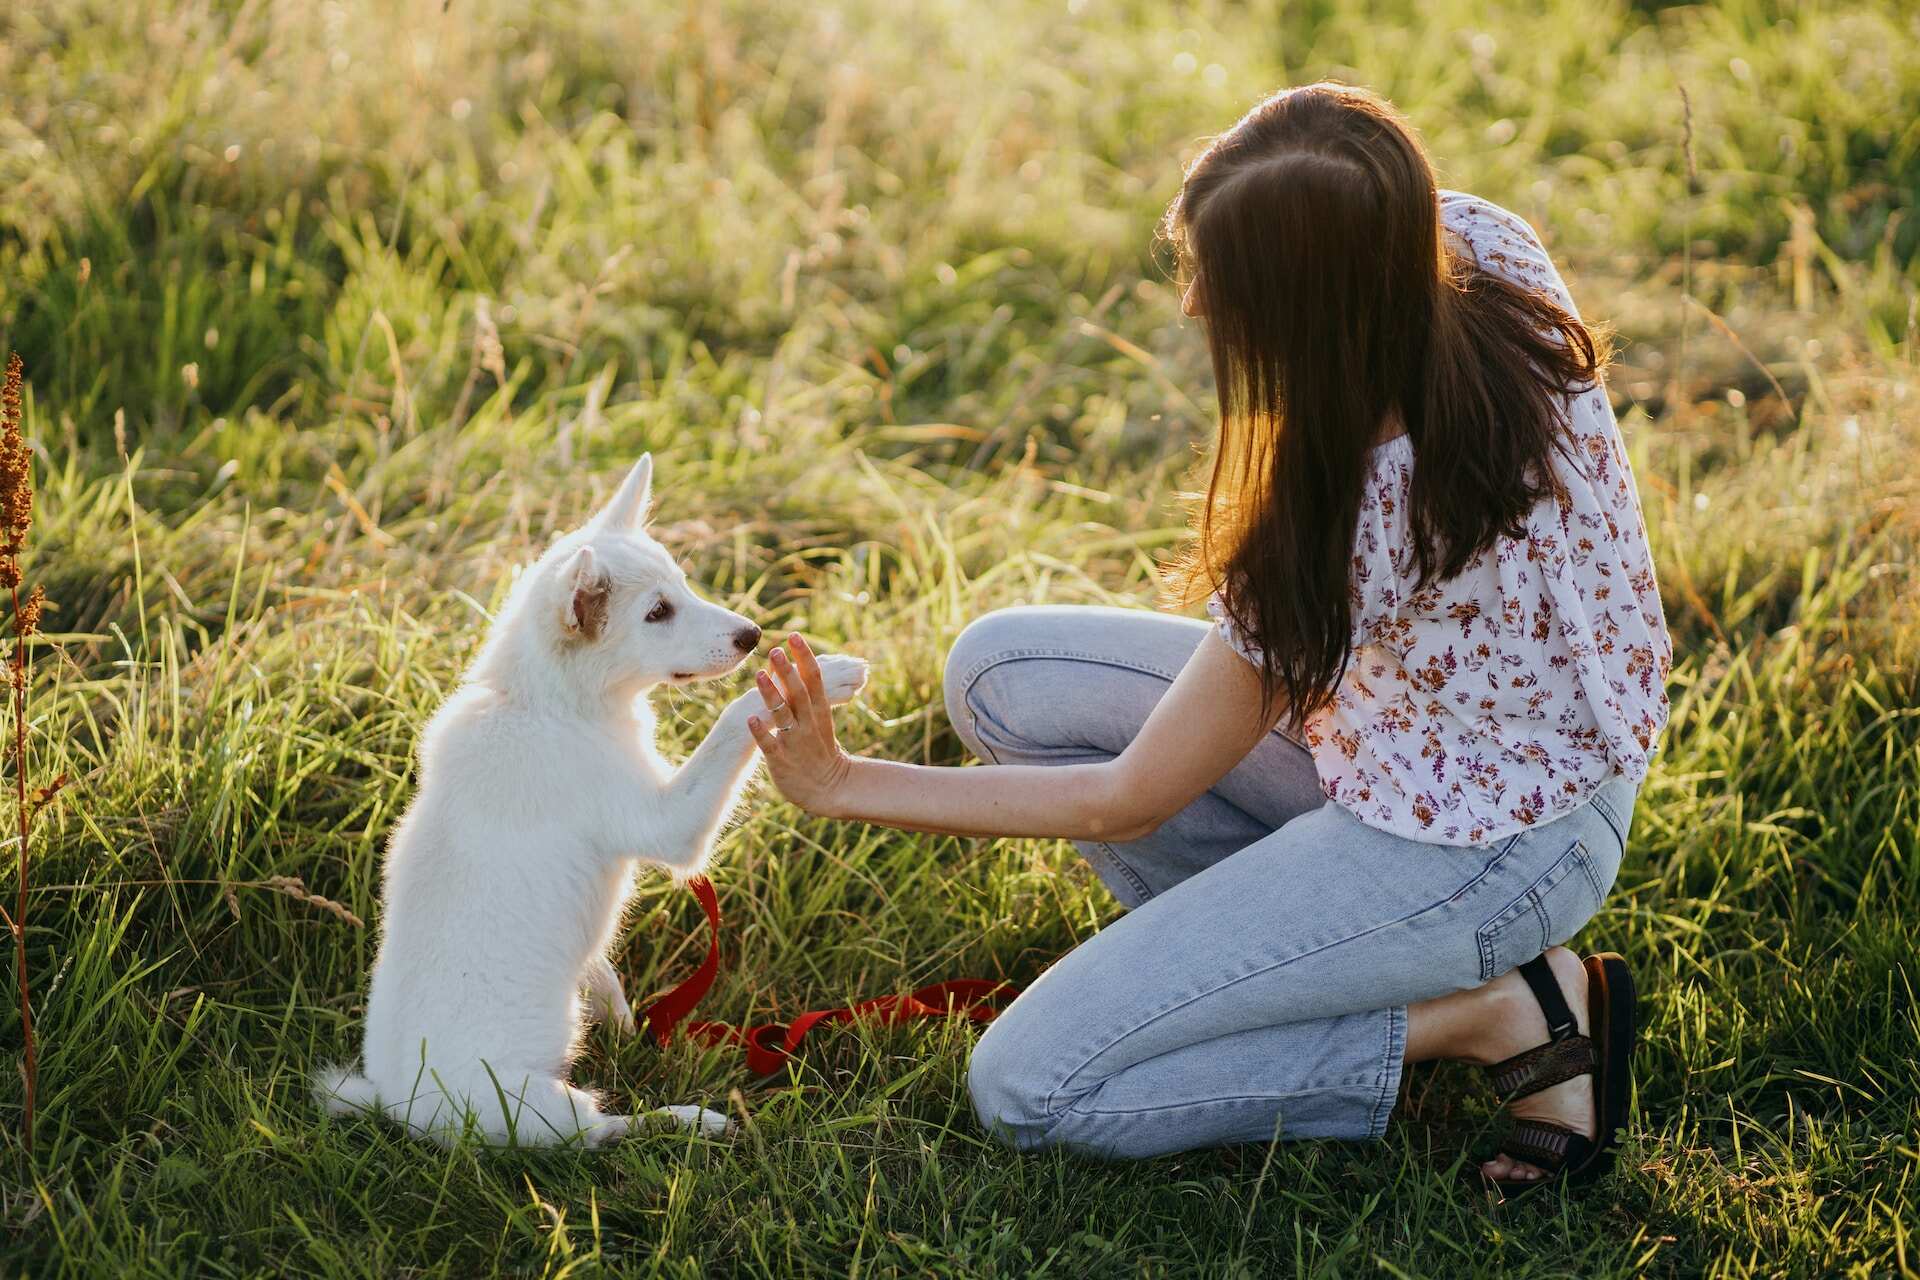 A woman training a puppy in a lawn